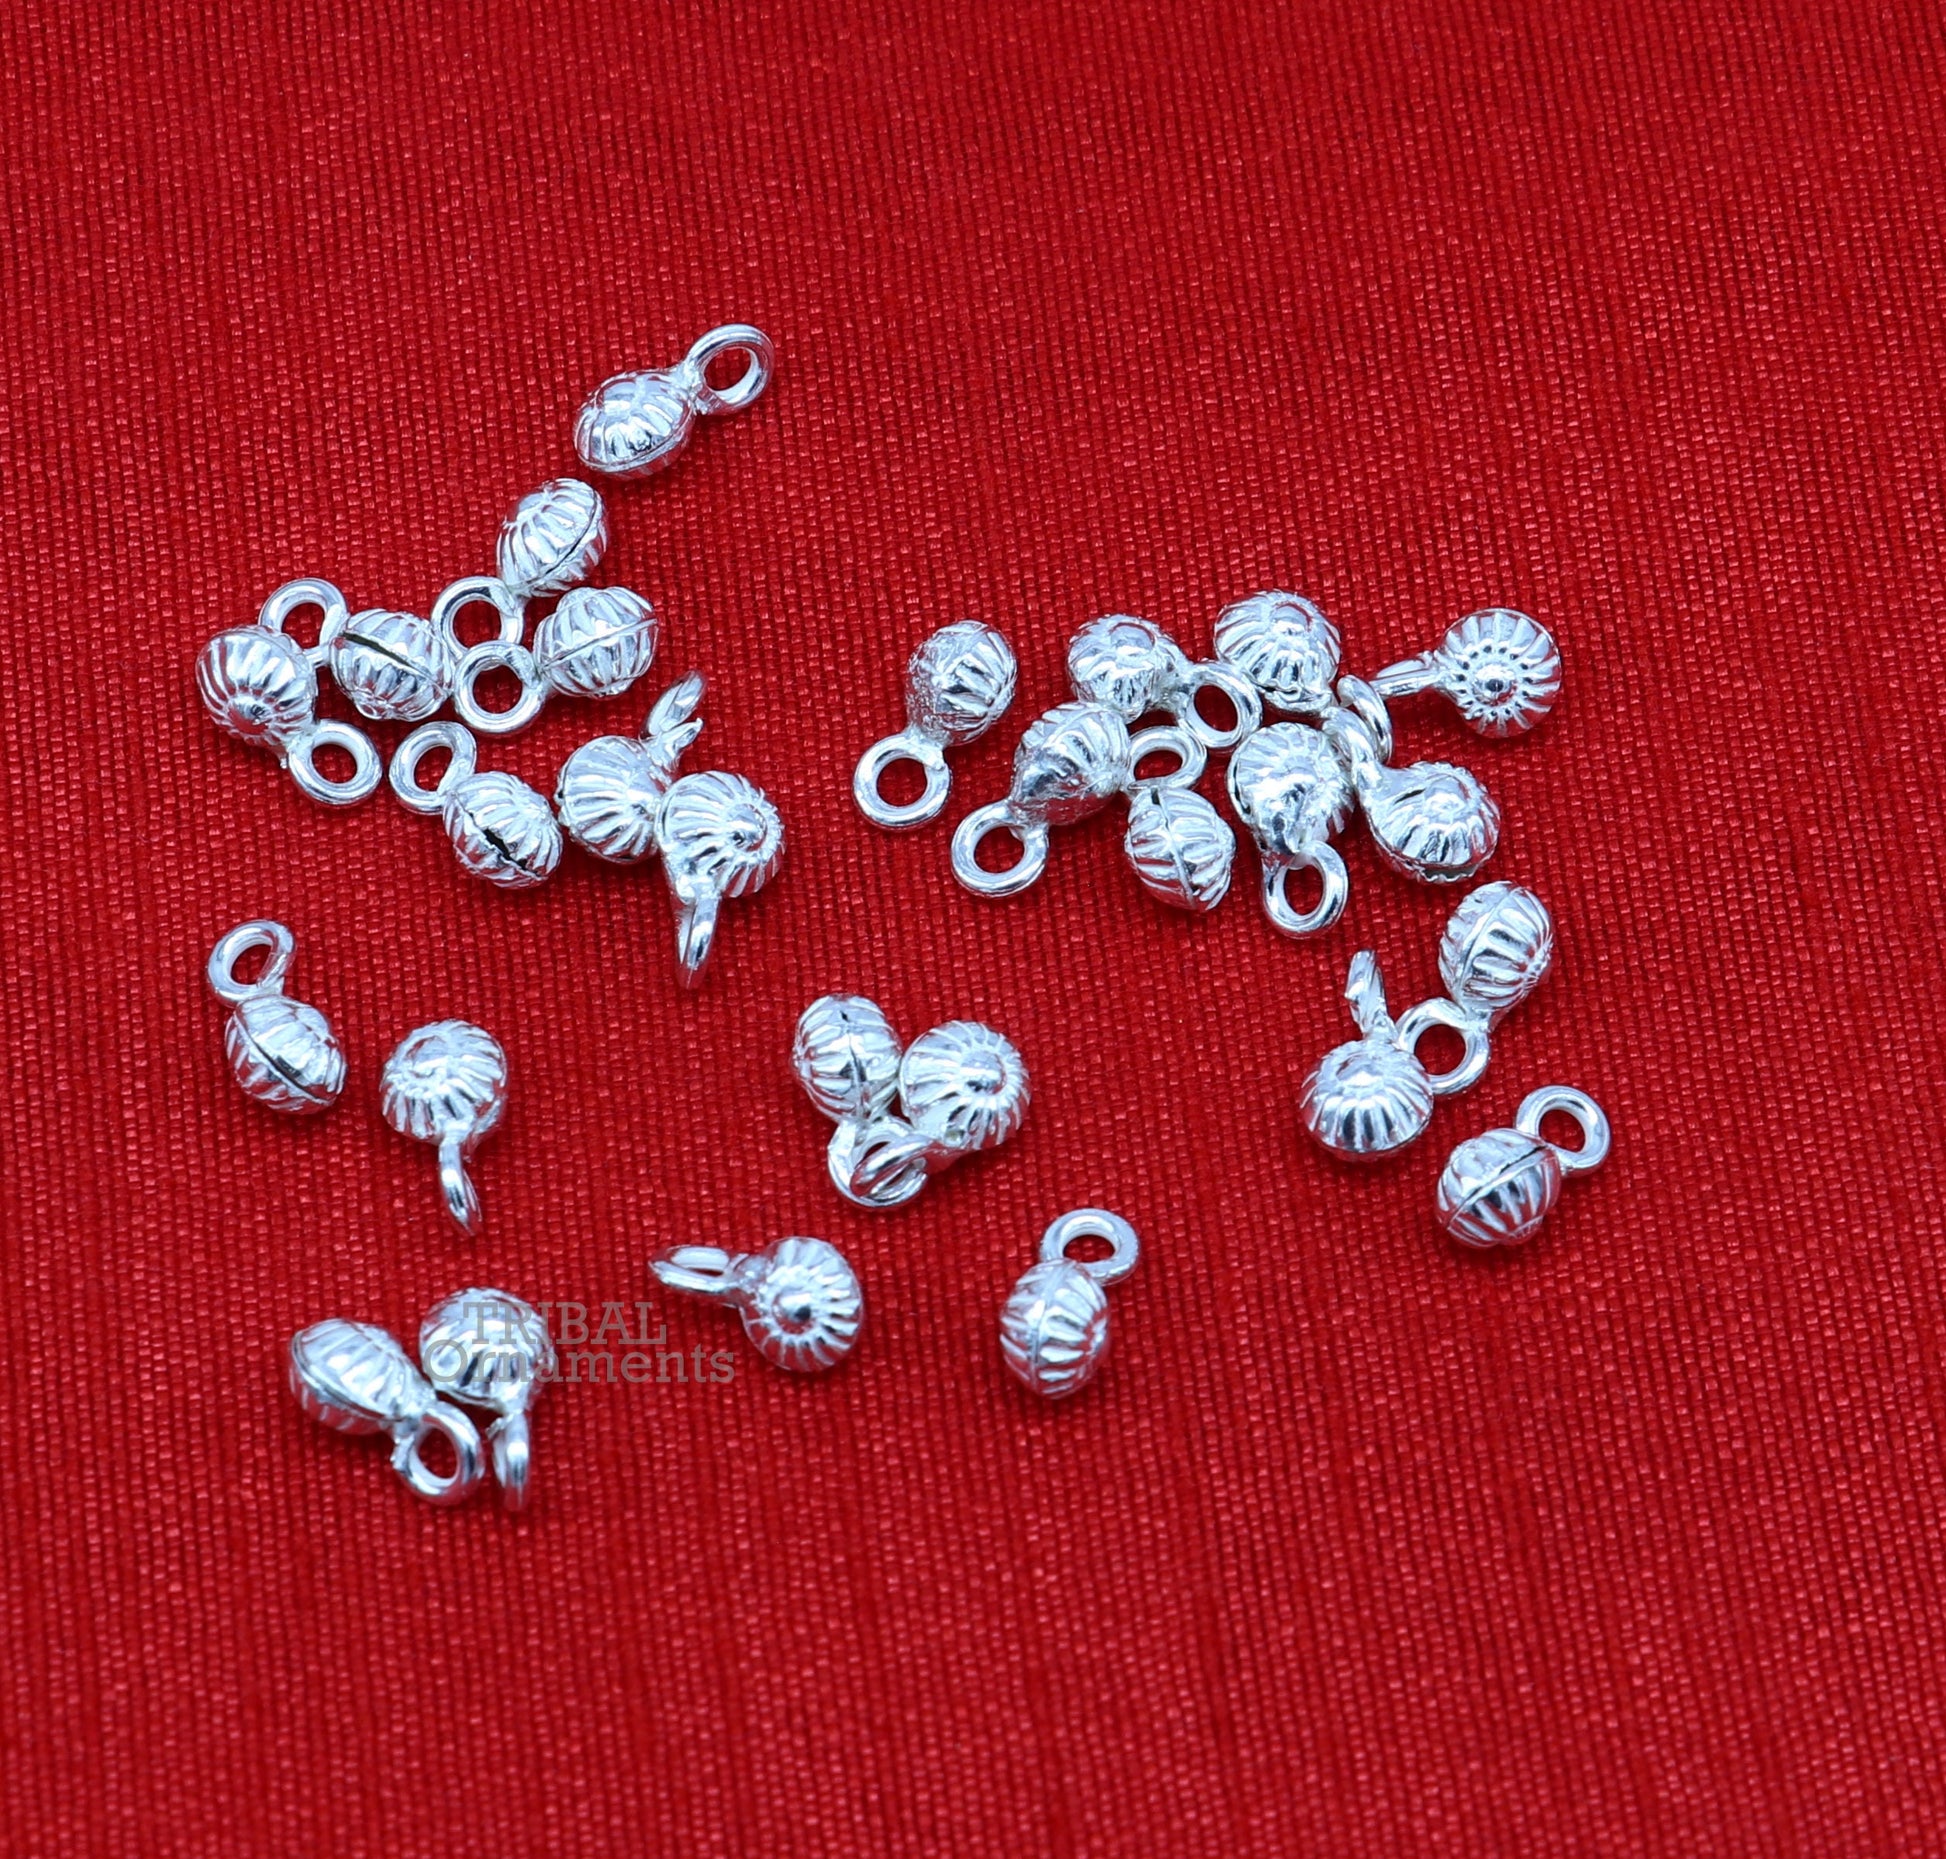 6 mm tiny hanging jingling bells lot 20 pieces 925 sterling silver fabulous beads or hanging drops for custom jewelry making lose beads bd20 - TRIBAL ORNAMENTS